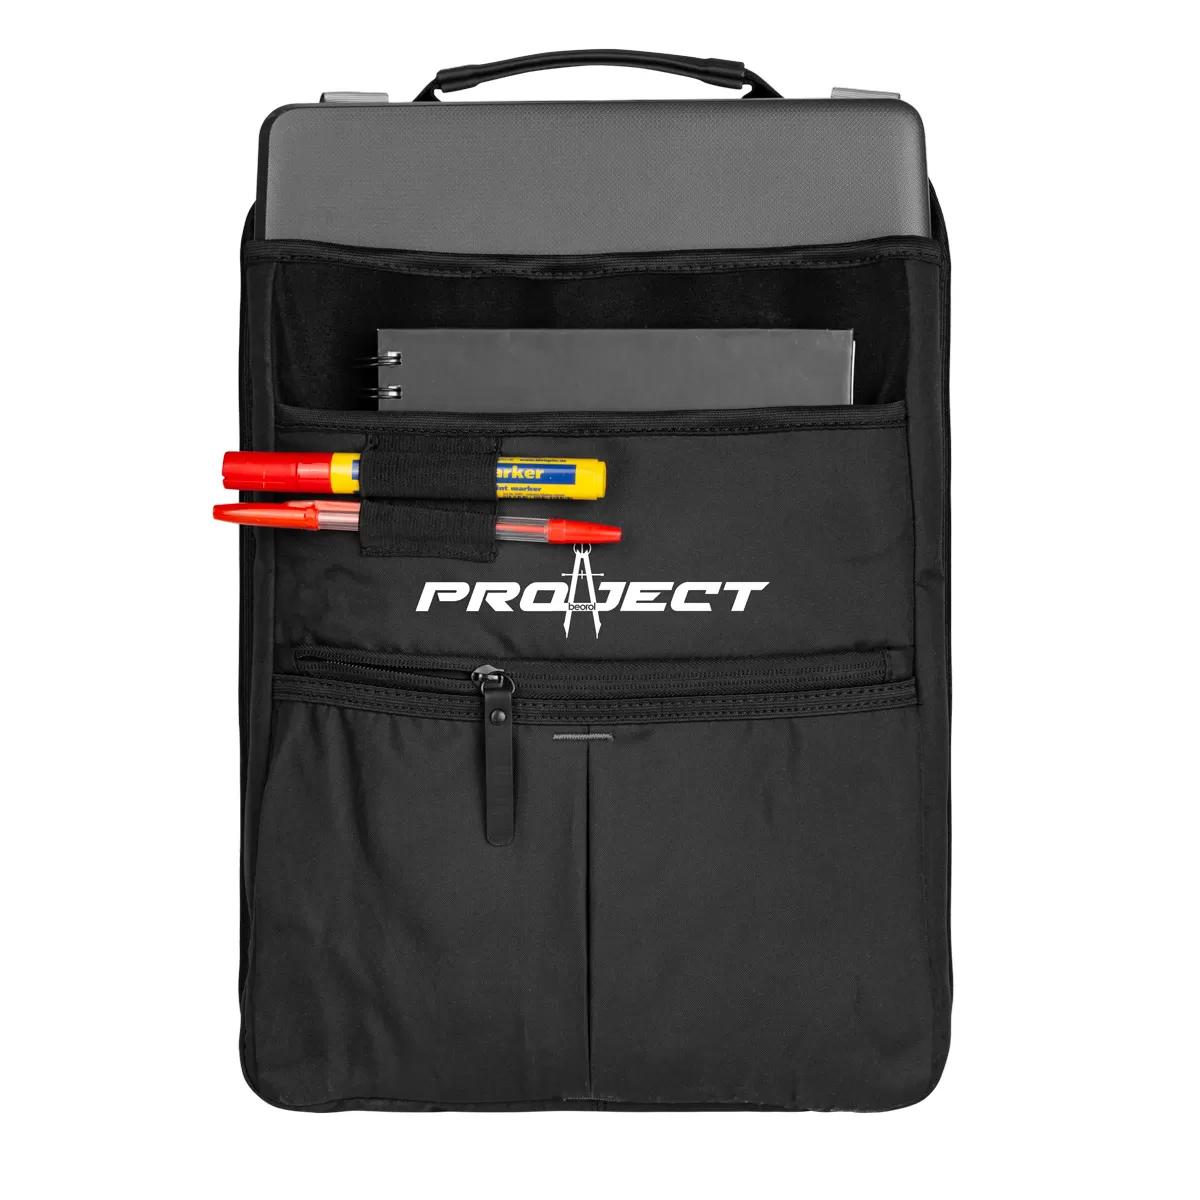 PROJECT laptop sleeve 